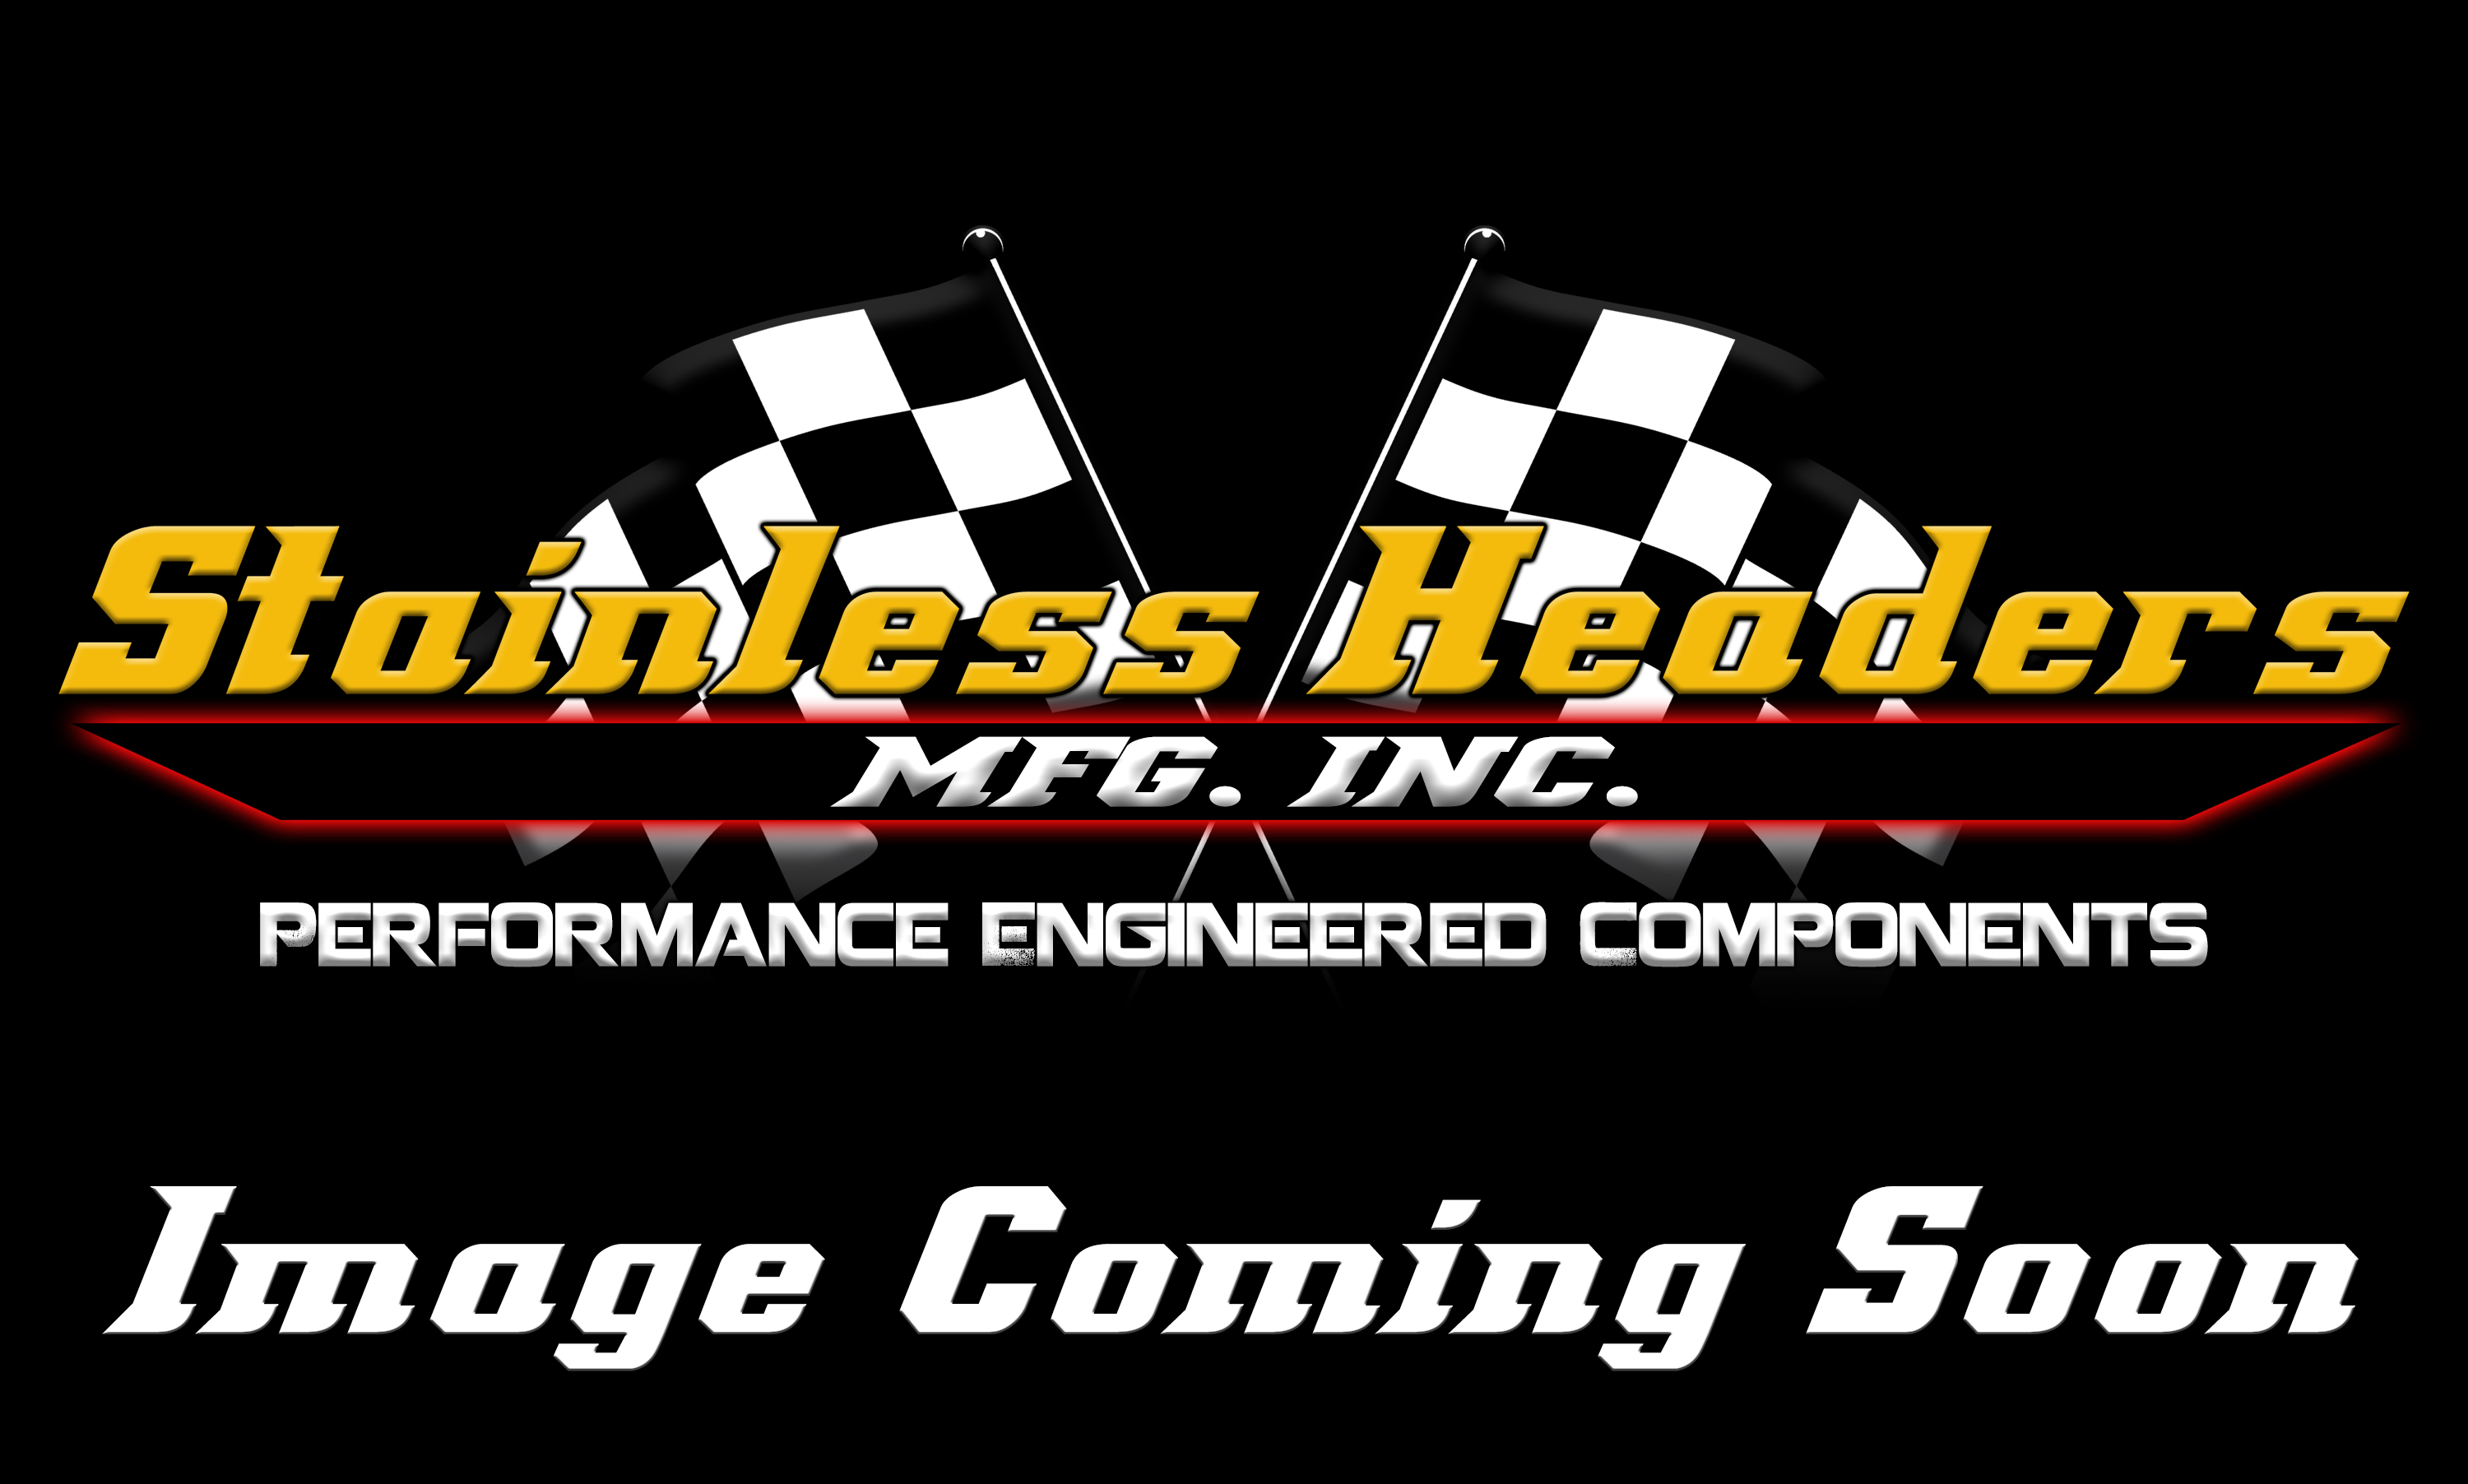 Stainless Headers - 2 1/2" Primary 2 into 1 Performance Merge Collector-16ga 304ss - Image 2